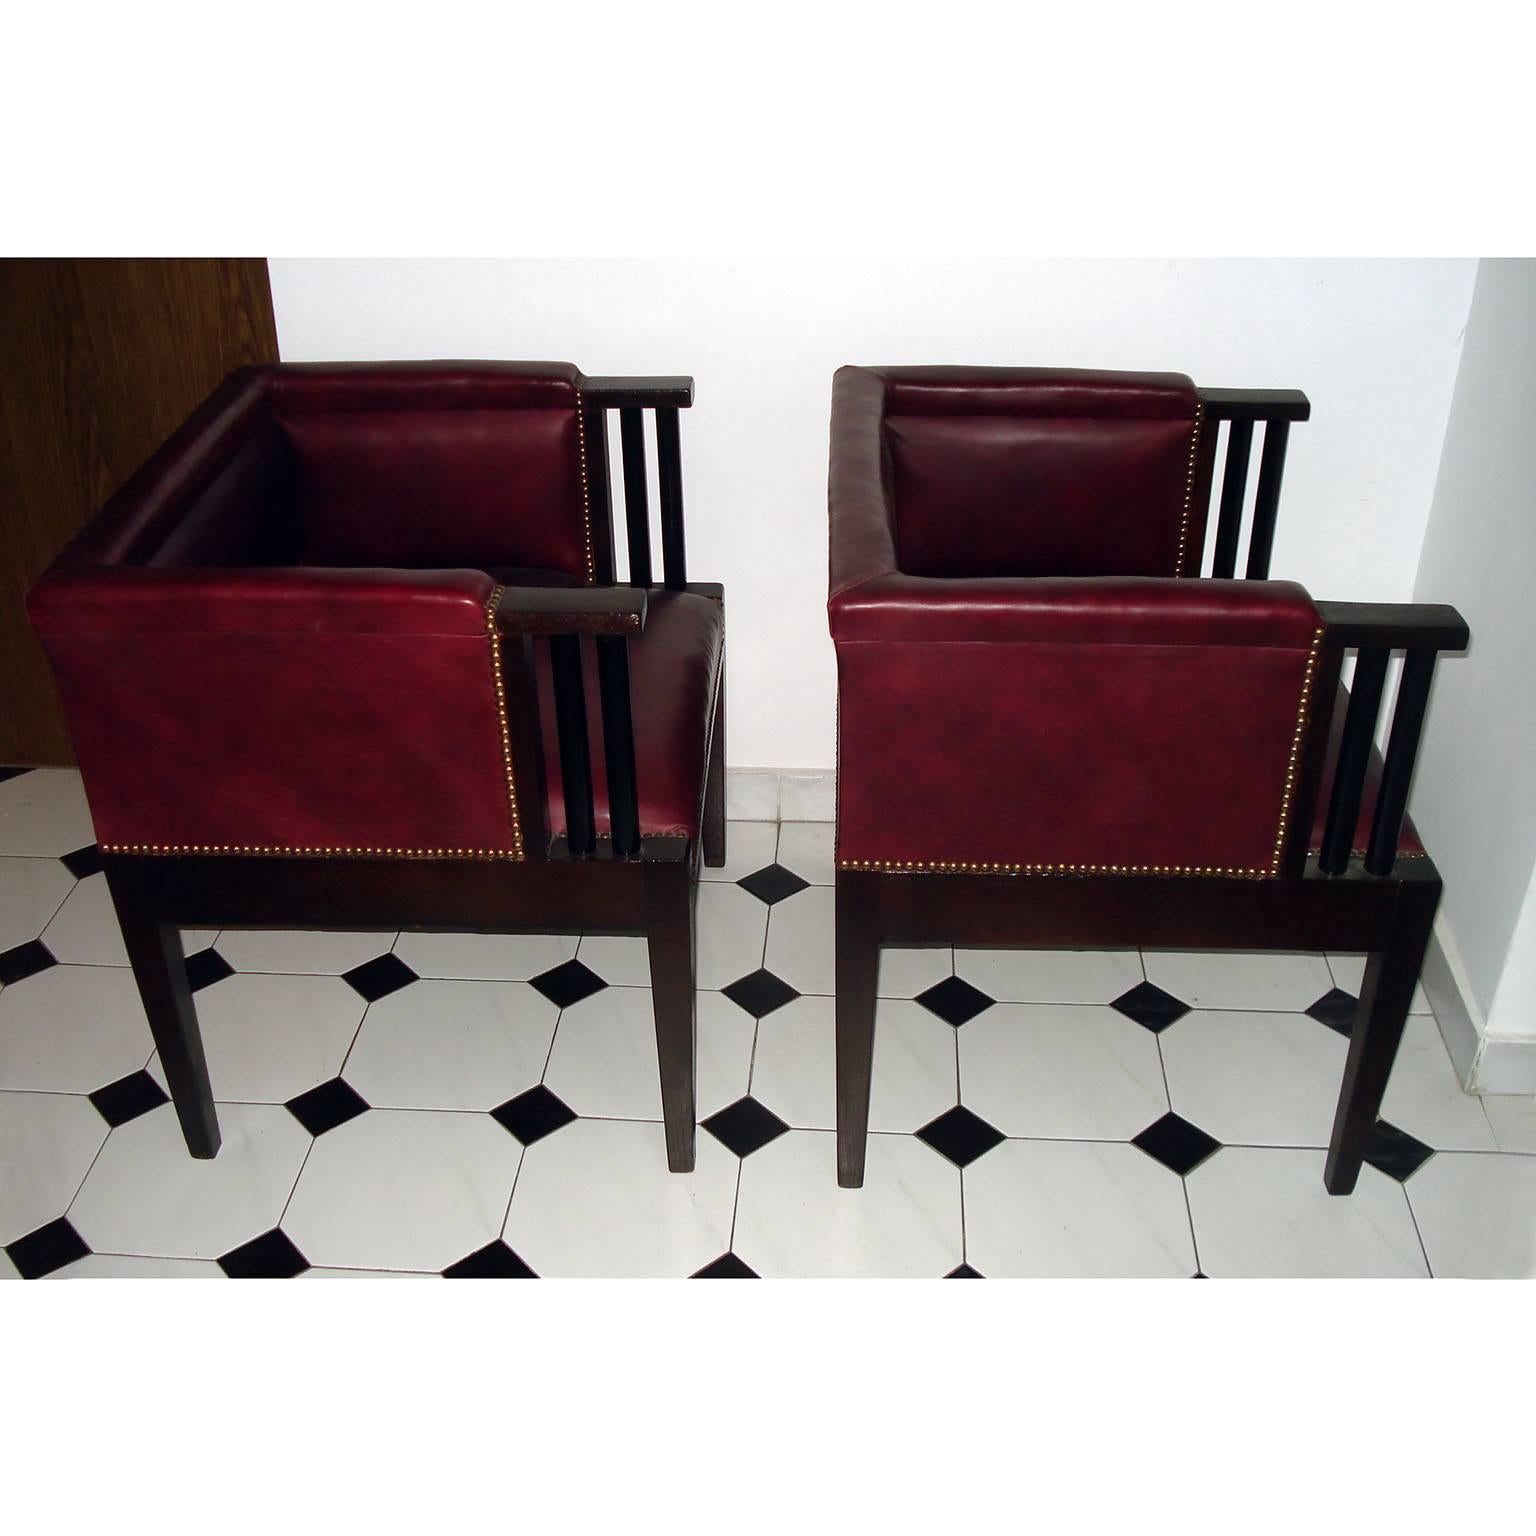 Lacquered Rare Pair of Constructivist Armchairs in the Style of Darmstadt Artists Colony